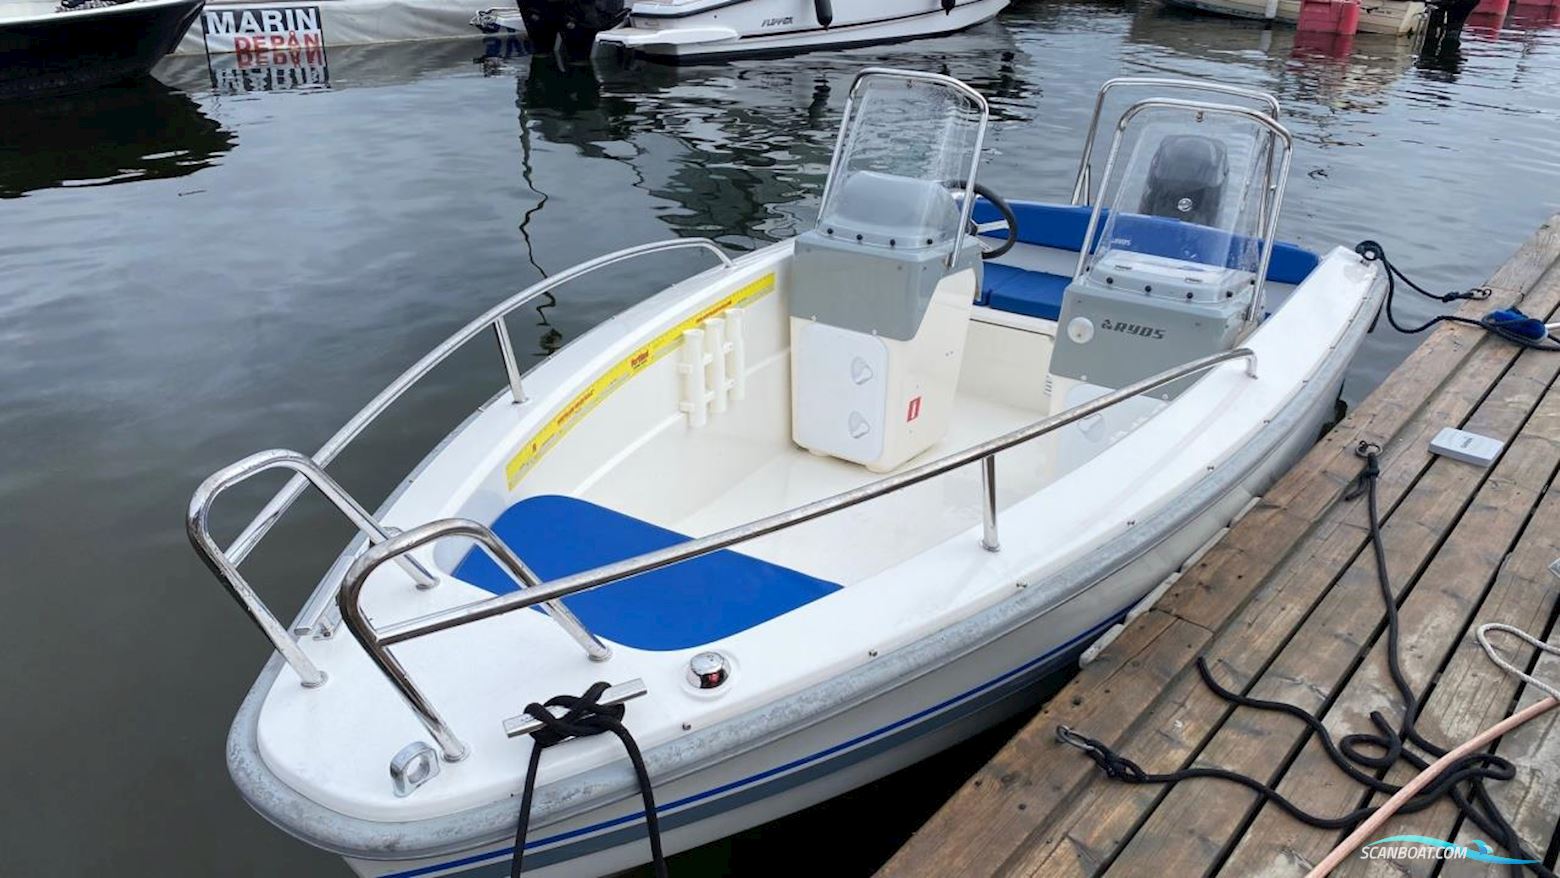 Ryds 488 TWIN Motor boat 2015, with Mercury engine, Sweden